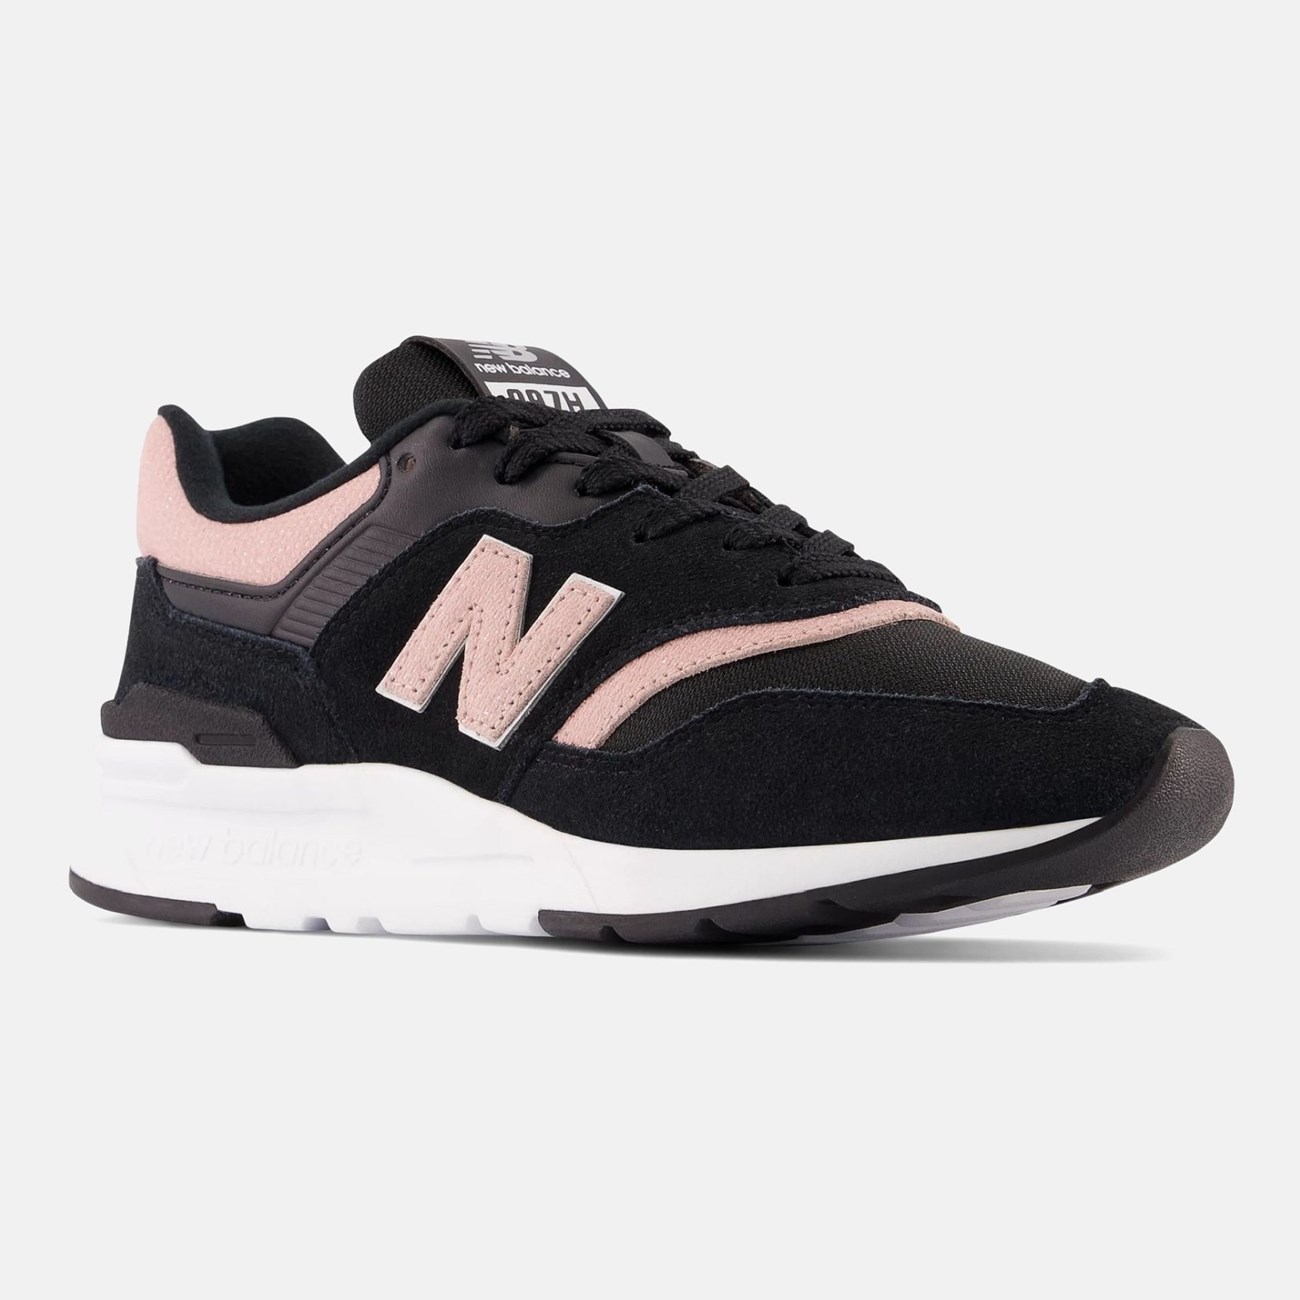 NEW BALANCE Γυναικεία Sneakers 997H CW997-HDL - The Athlete's Foot